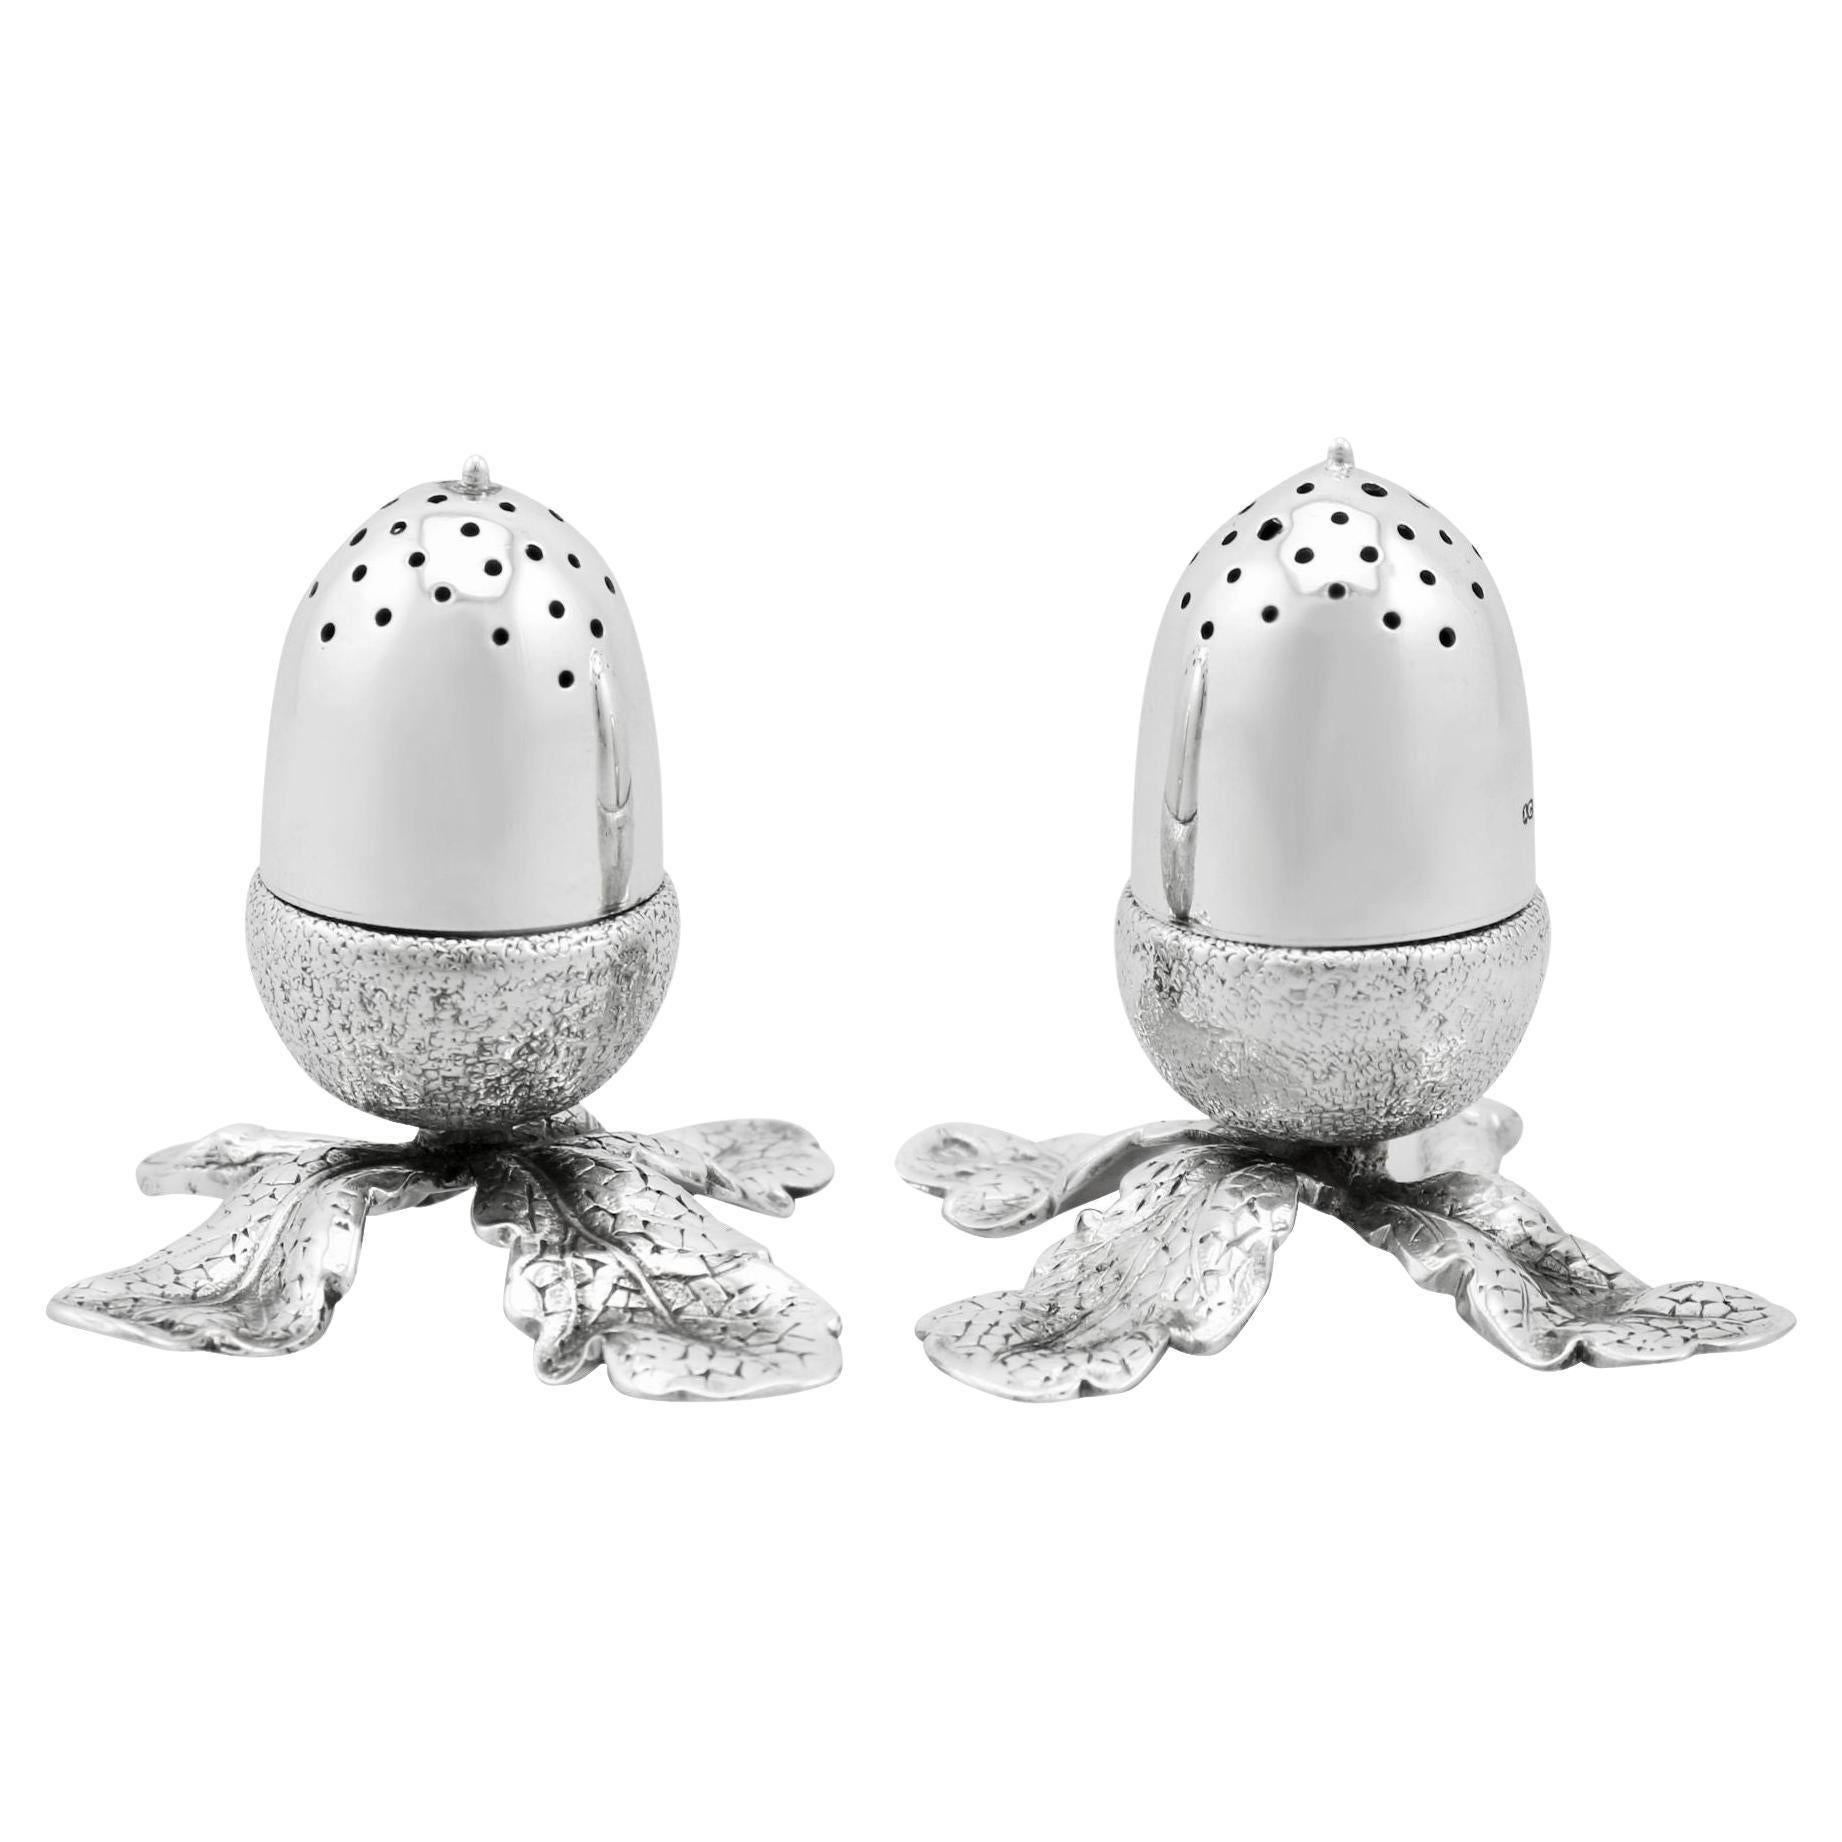 Antique Victorian Sterling Silver Acorn Peppers by Alexander Crichton